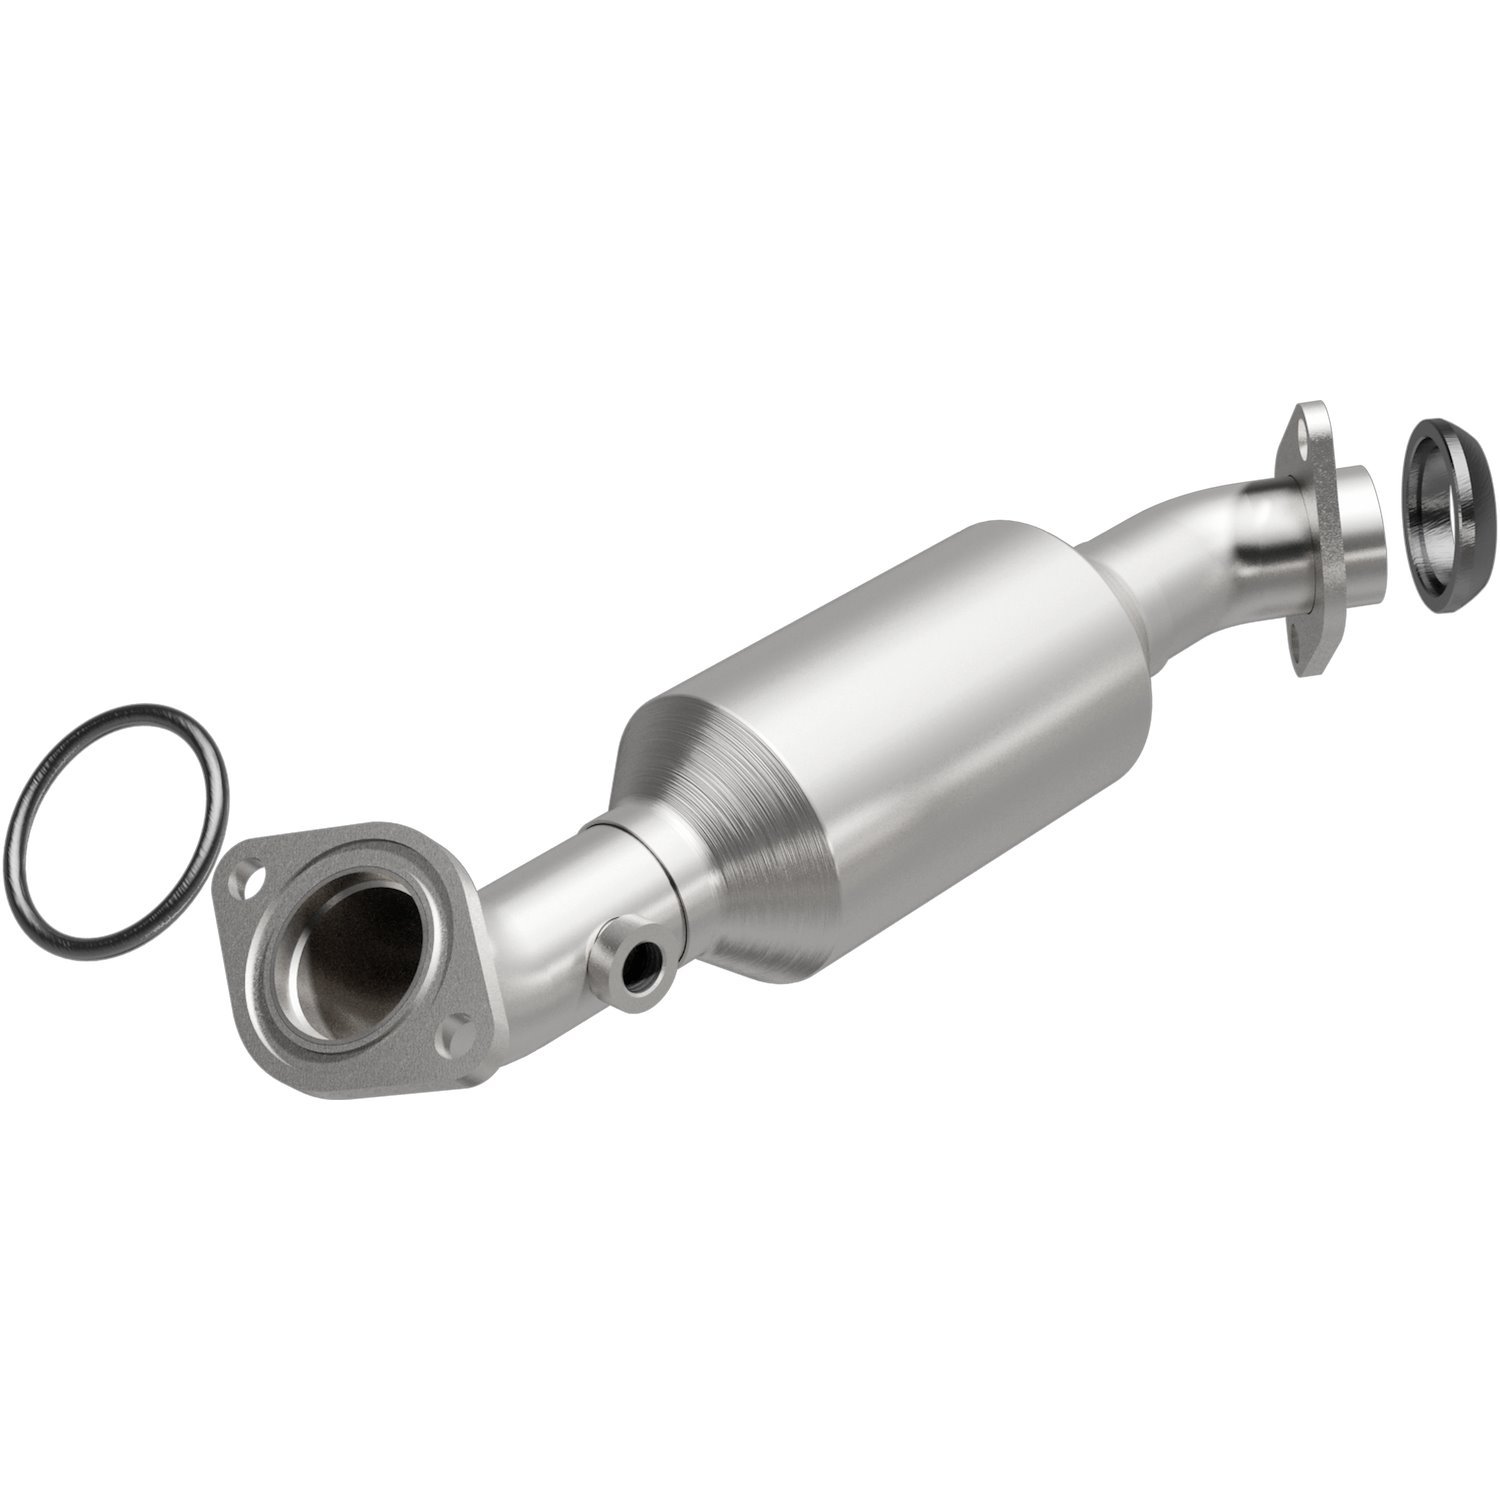 2004-2009 Cadillac CTS California Grade CARB Compliant Direct-Fit Catalytic Converter